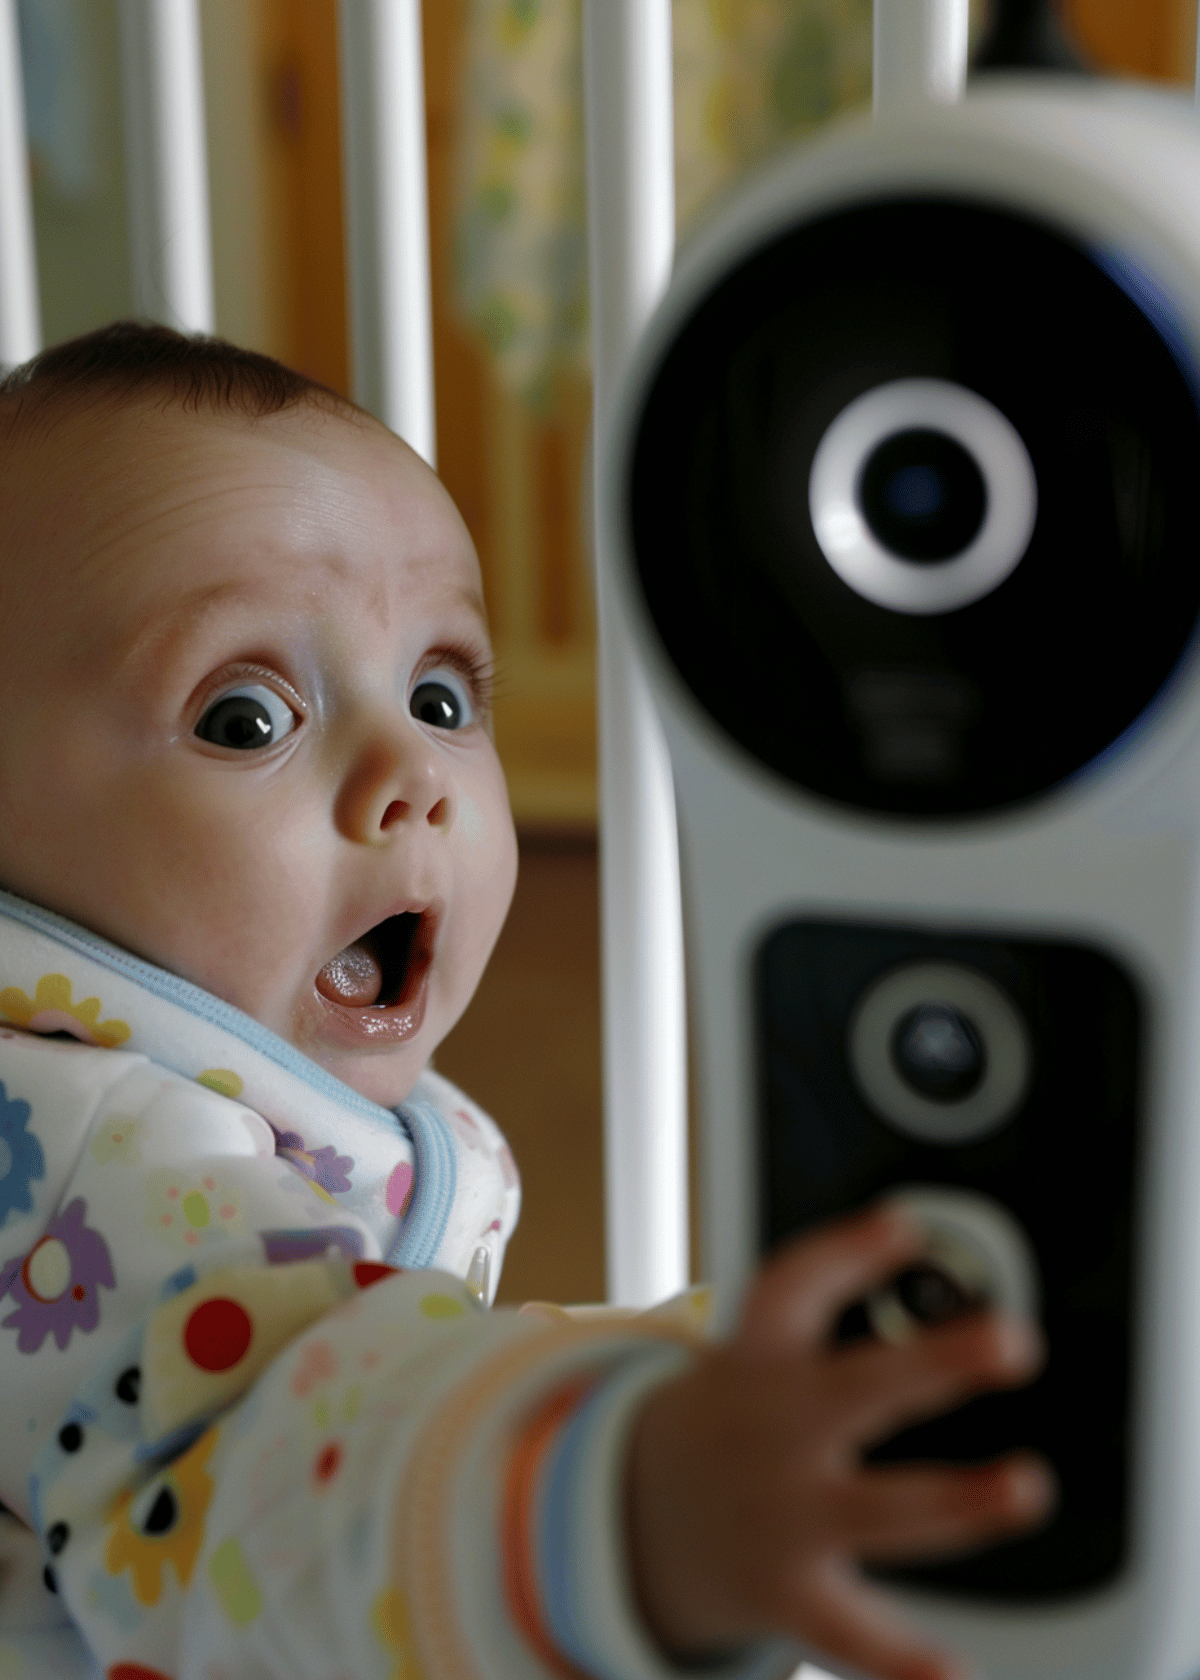 How Safe are Baby Monitors